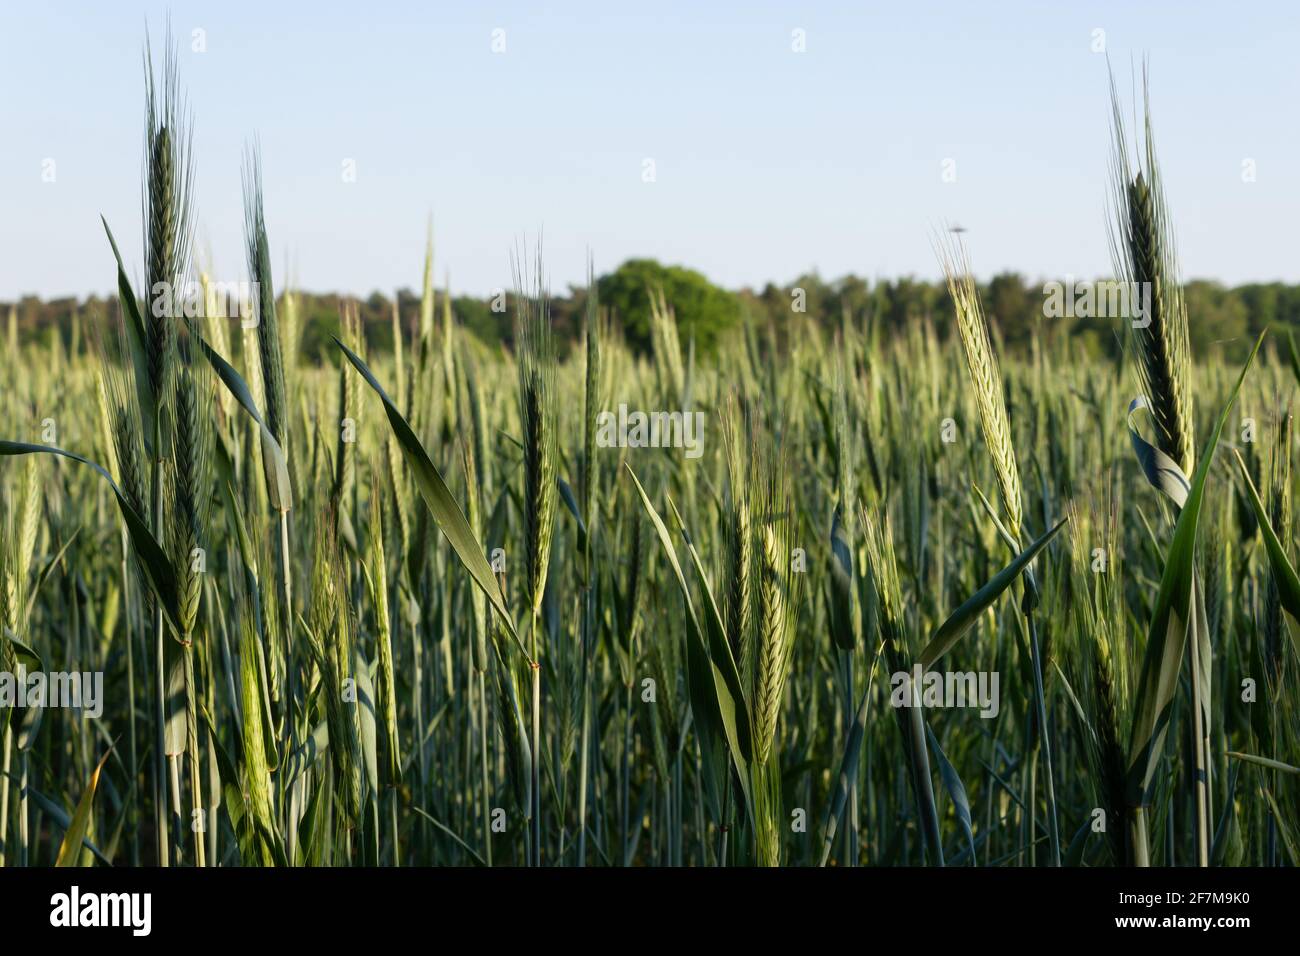 Young barley plants (Hordeum vulgare) on a field in Belgium Stock Photo